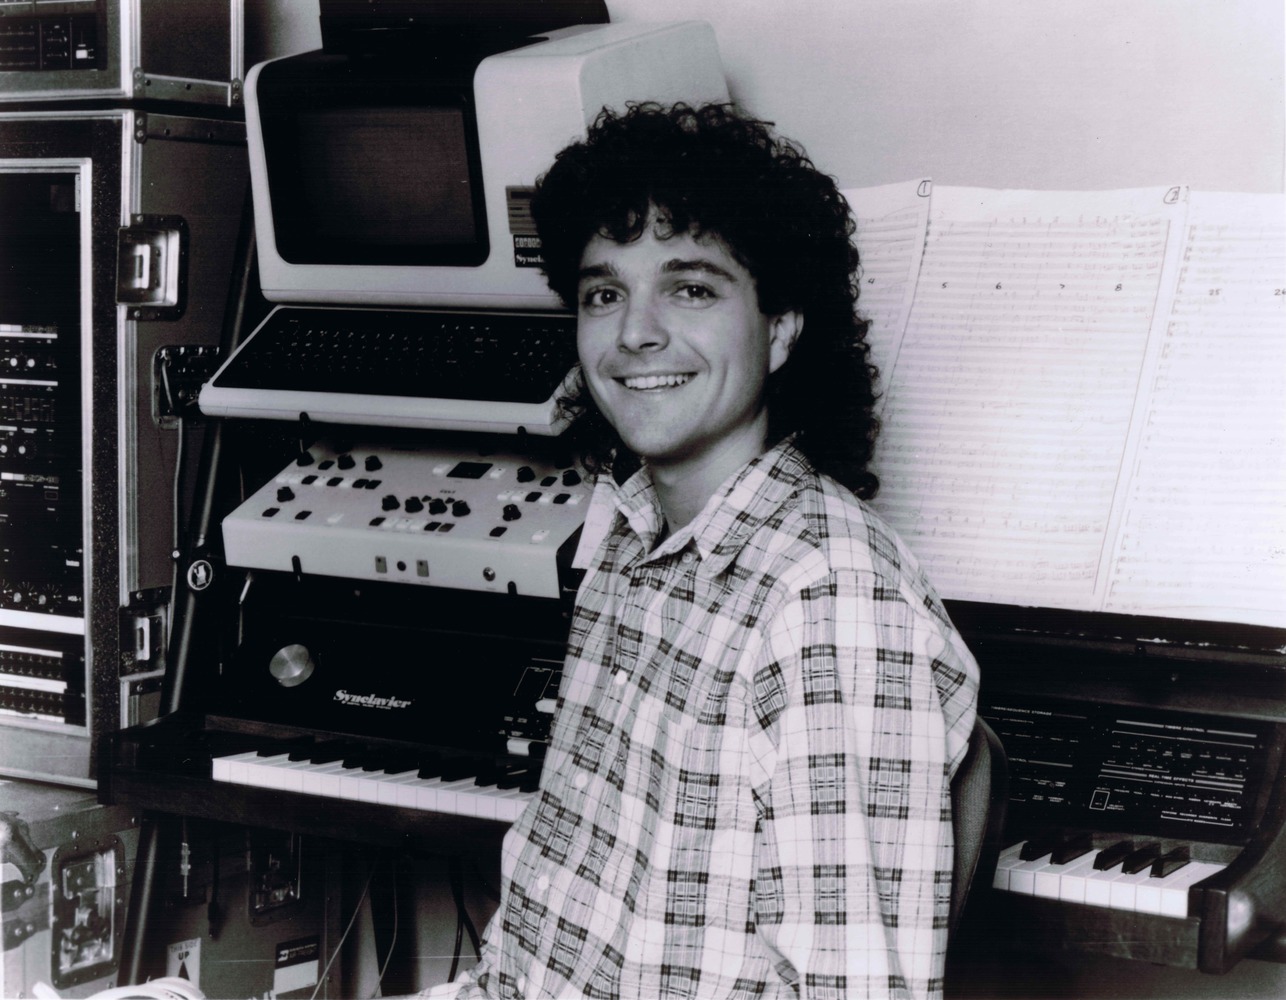 Anthony Marinelli with his Synclavier Digital Music System and rack mounted synthesizers used on Michael Jackson’s mega-hit album “Thriller”, Hollywood, CA  1985